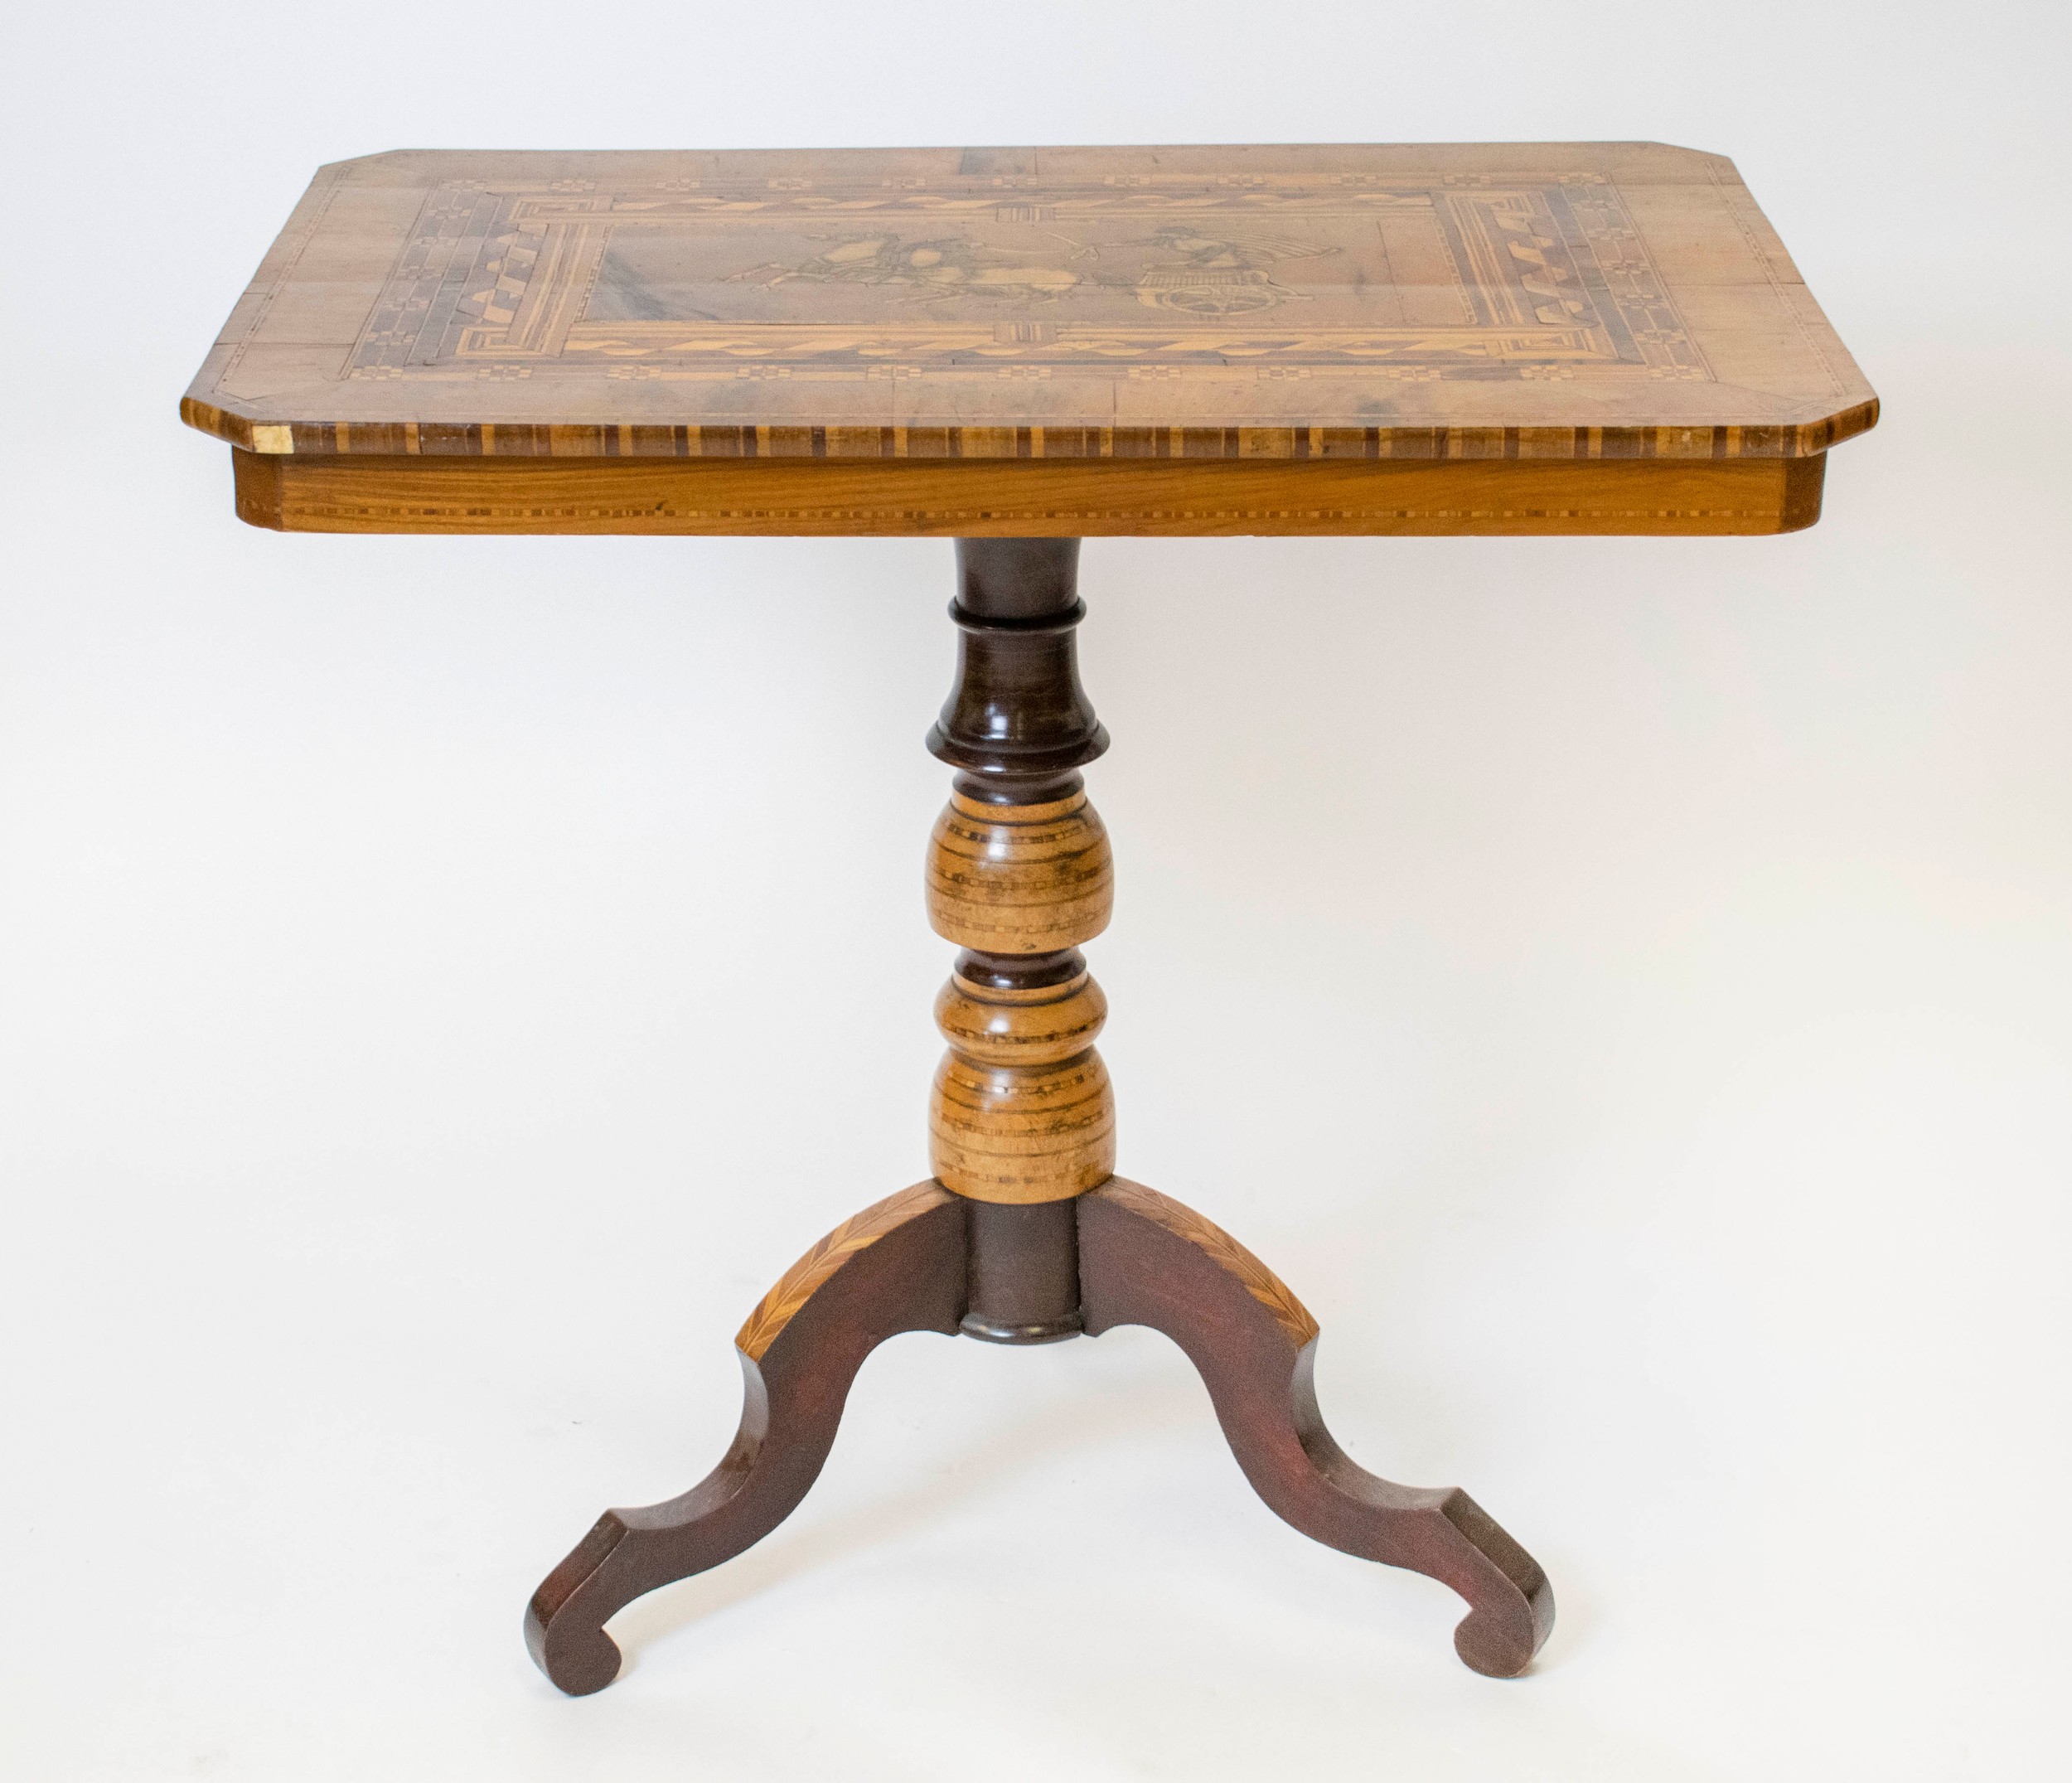 CENTRE TABLE, 76cm H x 80cm x 55cm D, 19th century Italian walnut, marquetry and parquetry.